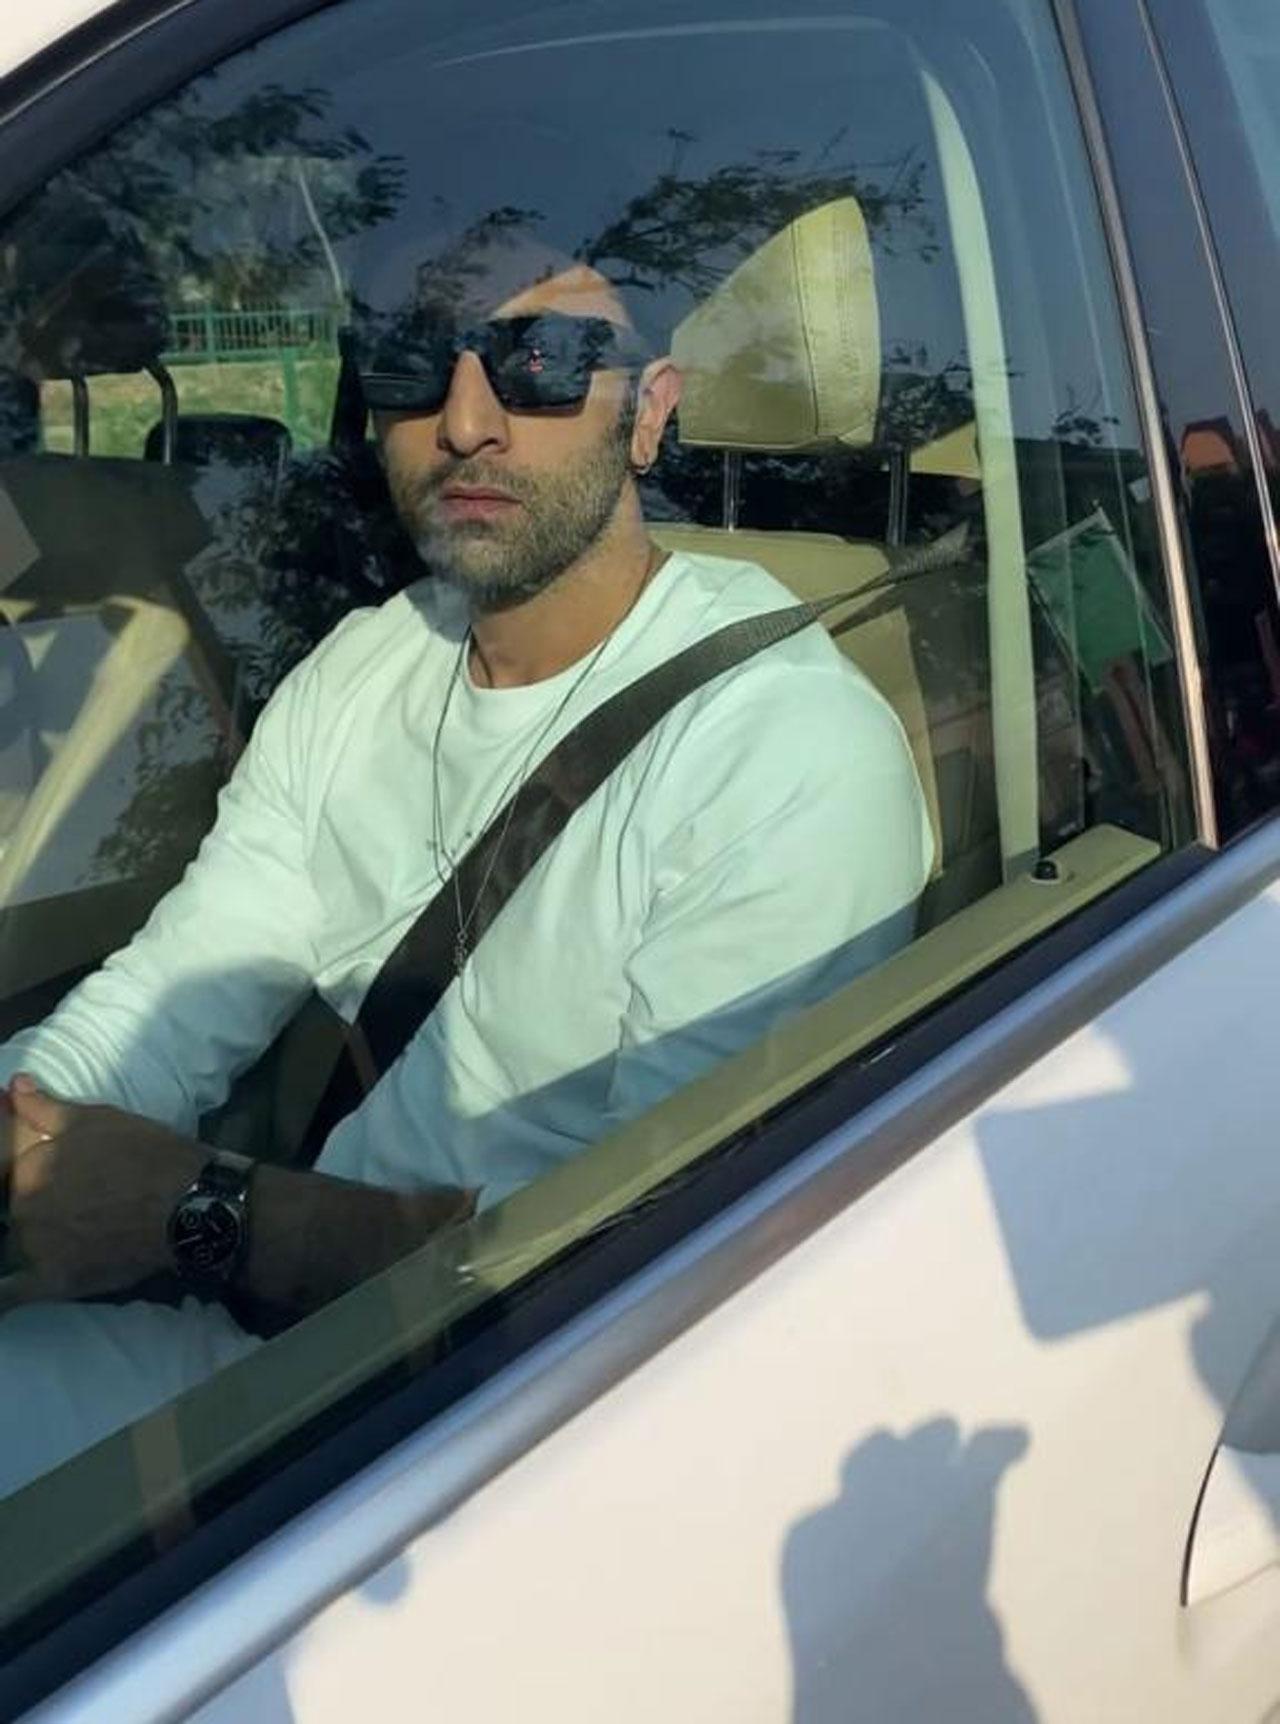 Ranbir Kapoor was looking as cool as ever as he was clicked in his car. He was heading to his director Luv Ranjan’s wedding in Agra. The two are coming together for a rom-com that’s coming out in 2023 and also stars Shraddha Kapoor, Boney Kapoor, and Dimple Kapadia.